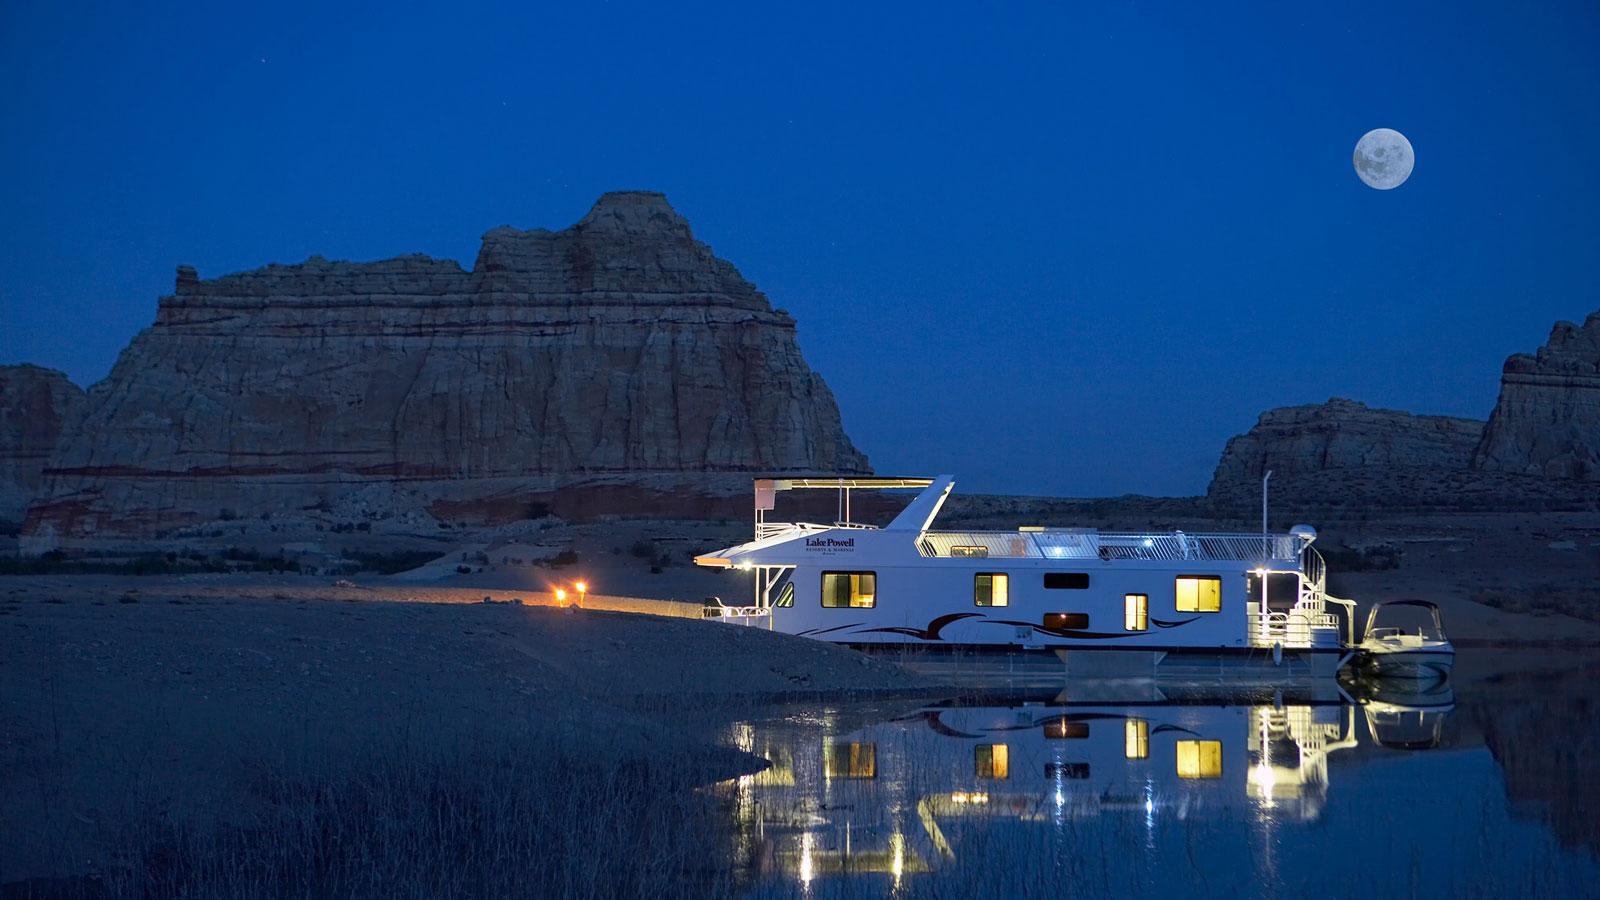 Settling in for the night on Lake Powell